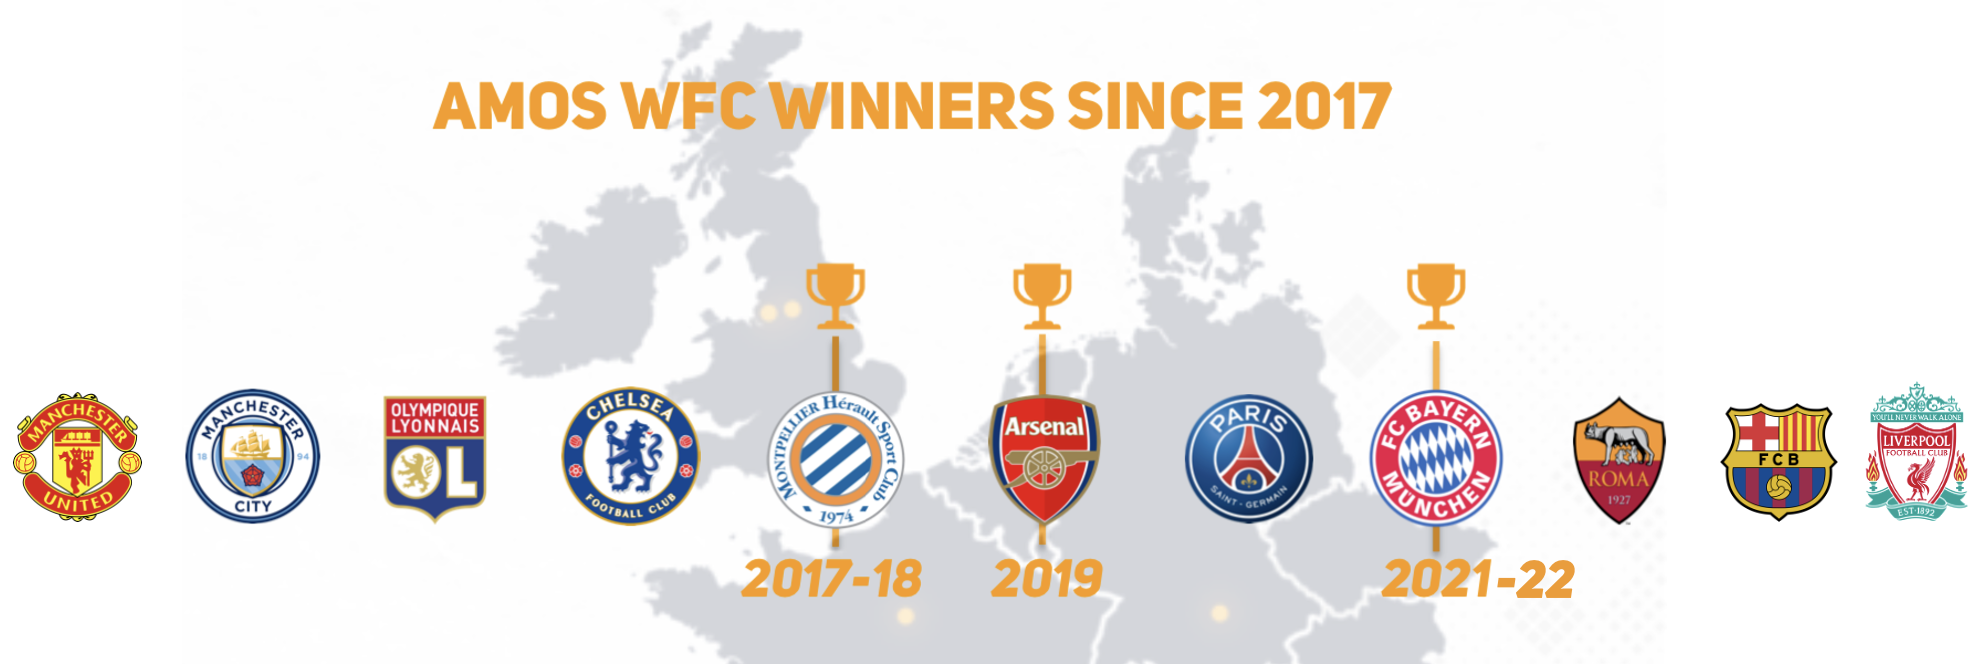 AMOS Women's French Cup Winner since 2017 : MHSC twice, Arsenal once and Bayern twice.